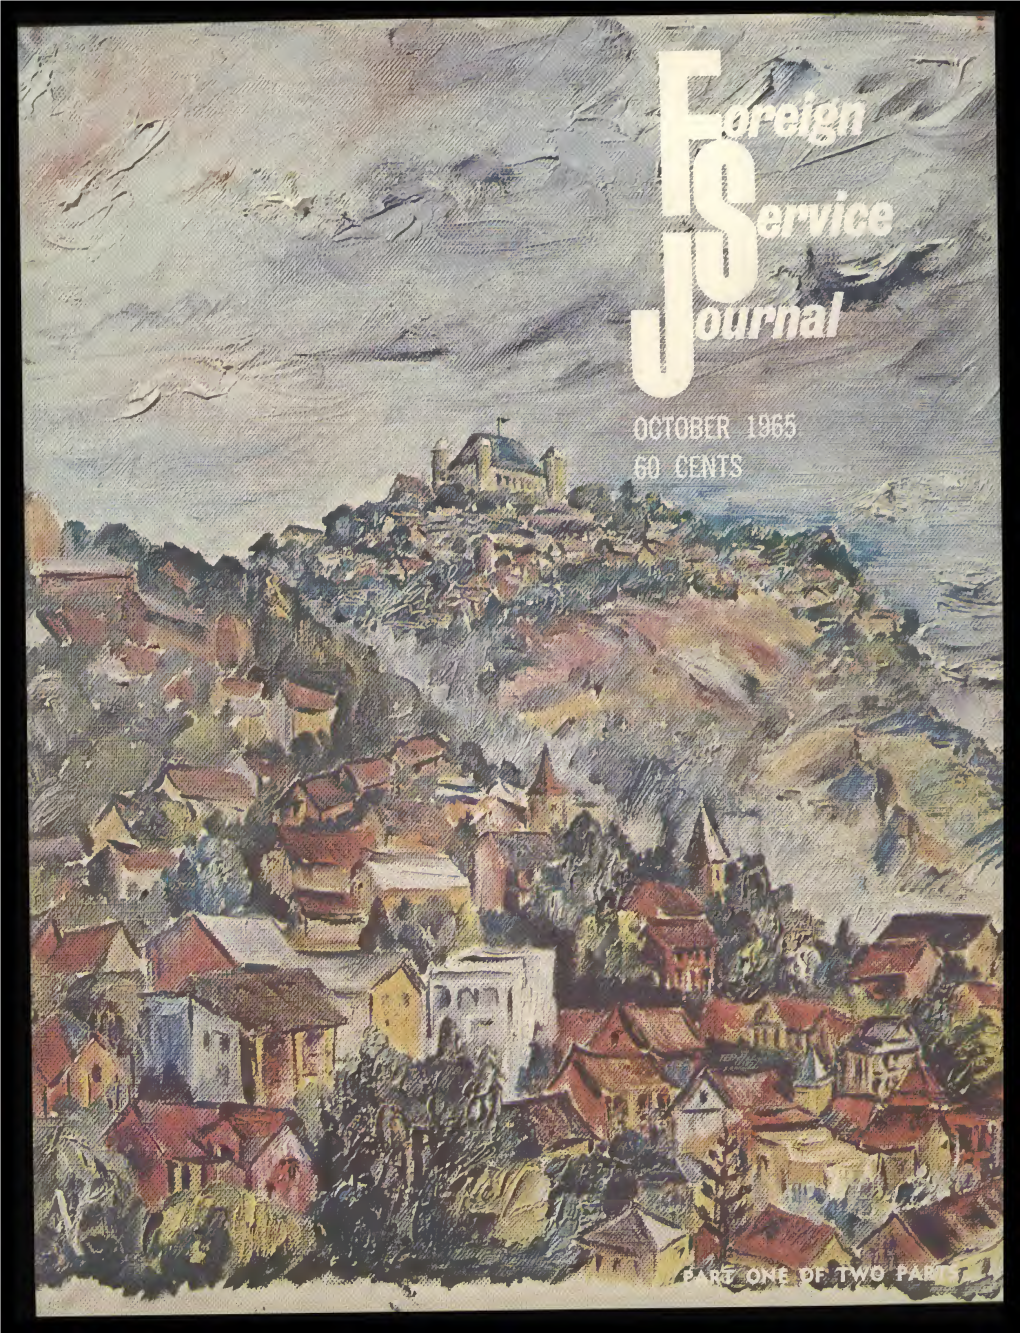 The Foreign Service Journal, October 1965